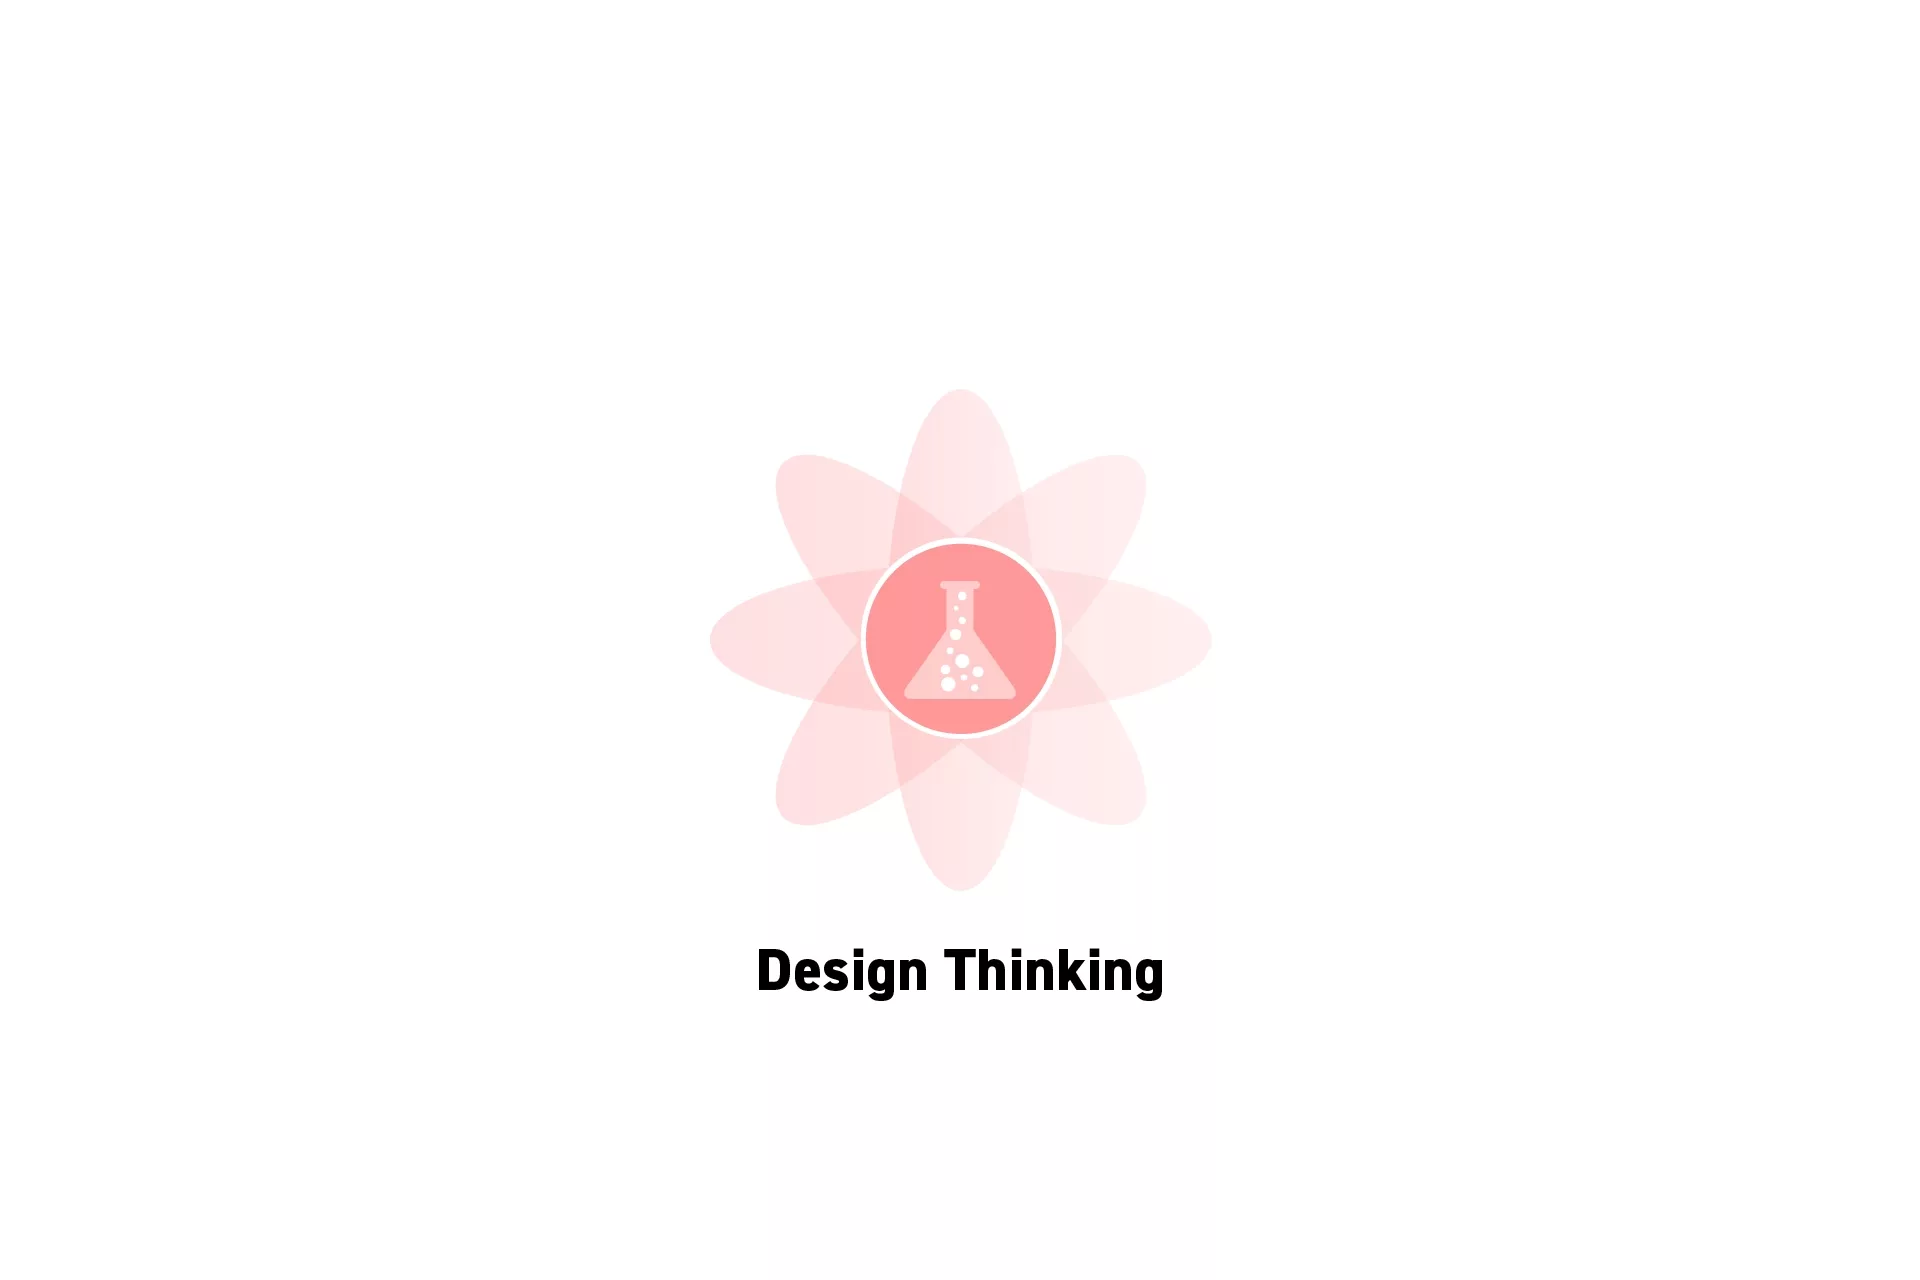 A flower that represents Strategy with the text “Design Thinking” beneath it.